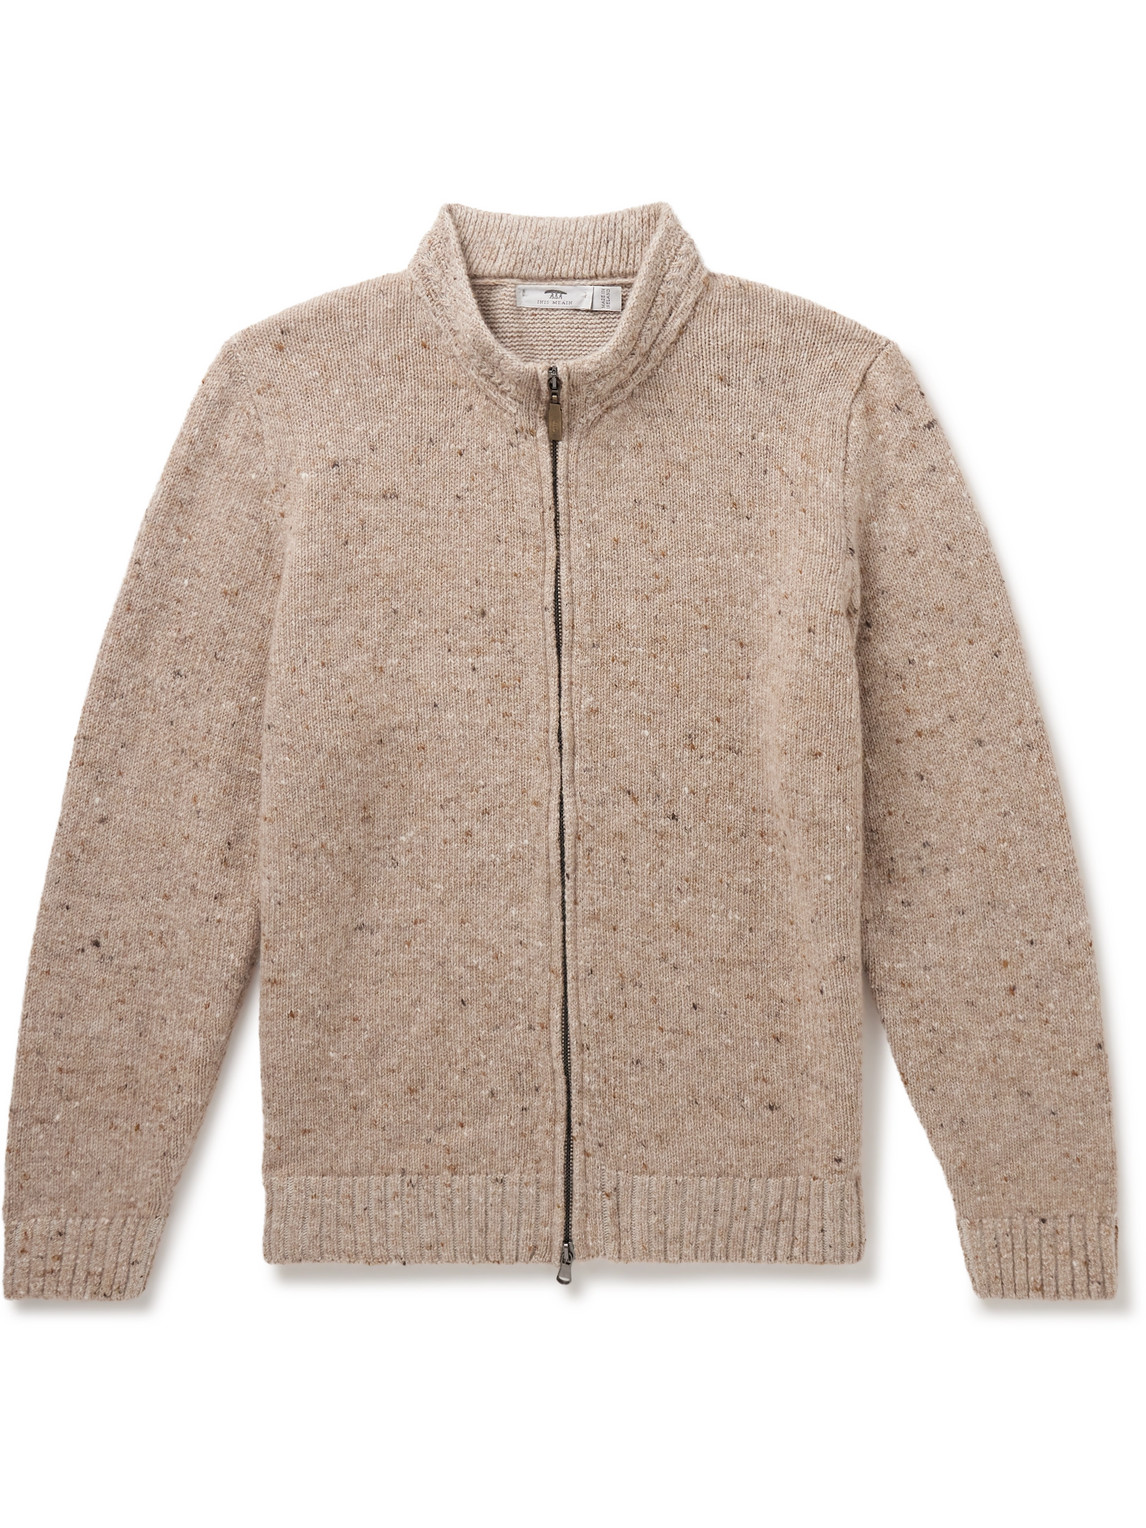 Inis Meain Donegal Merino Wool And Cashmere-blend Zip-up Cardigan In Neutrals